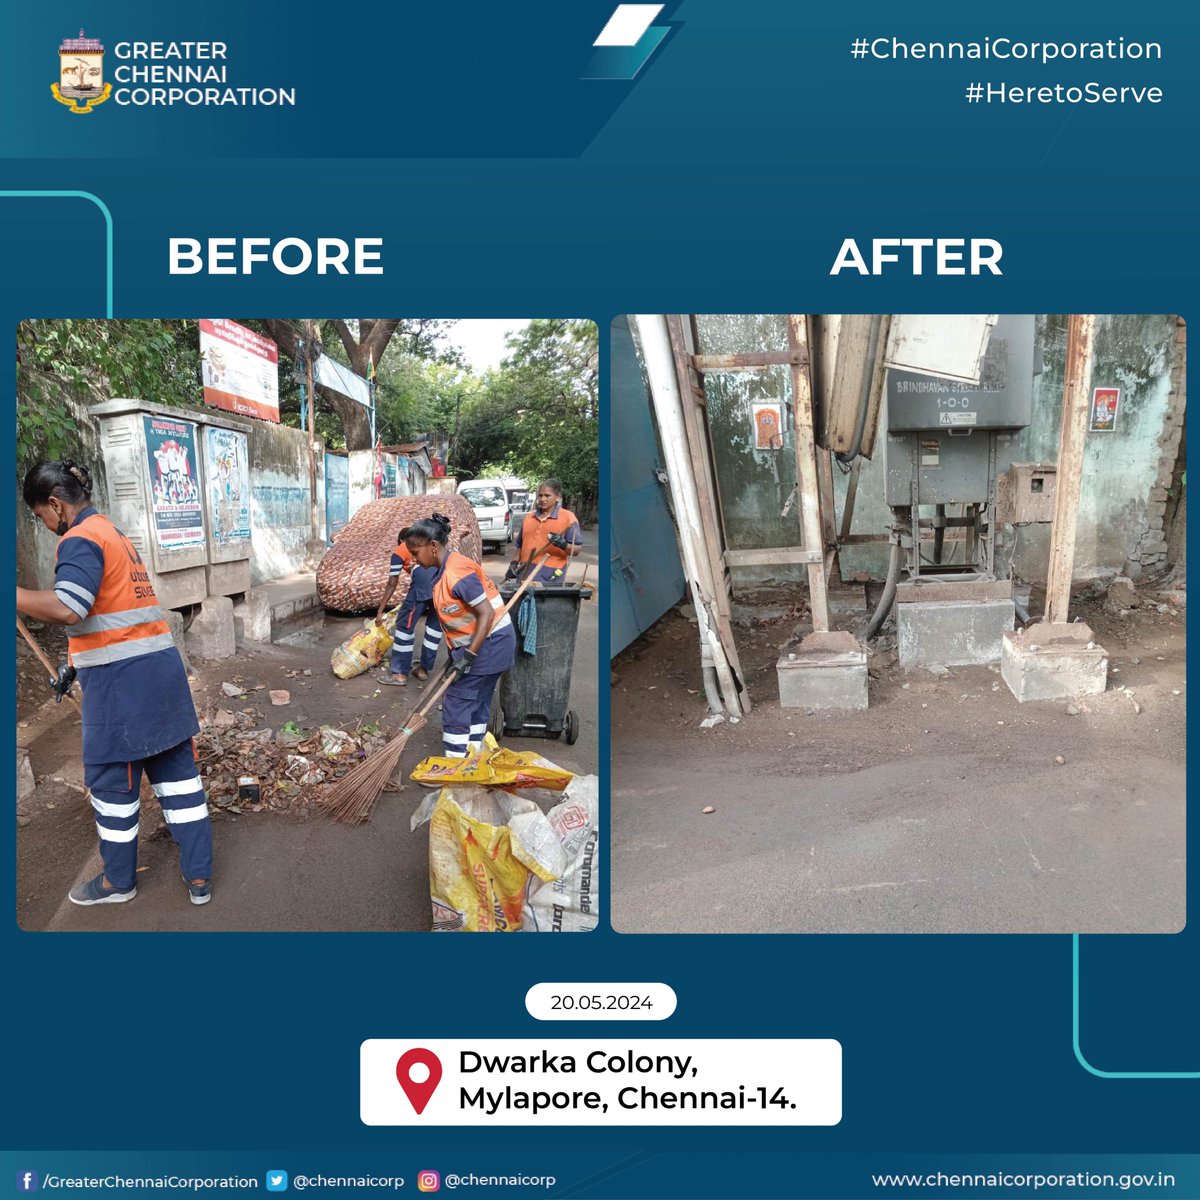 Dear #Chennaiites, Garbage around the EB box and transformer has been cleaned by GCC conservancy staff. Littering near electrical equipment can cause fire accidents. Be responsible and keep our city safe. Garbage removed from Mylapore 👇 #ChennaiCorporation #HeretoServe